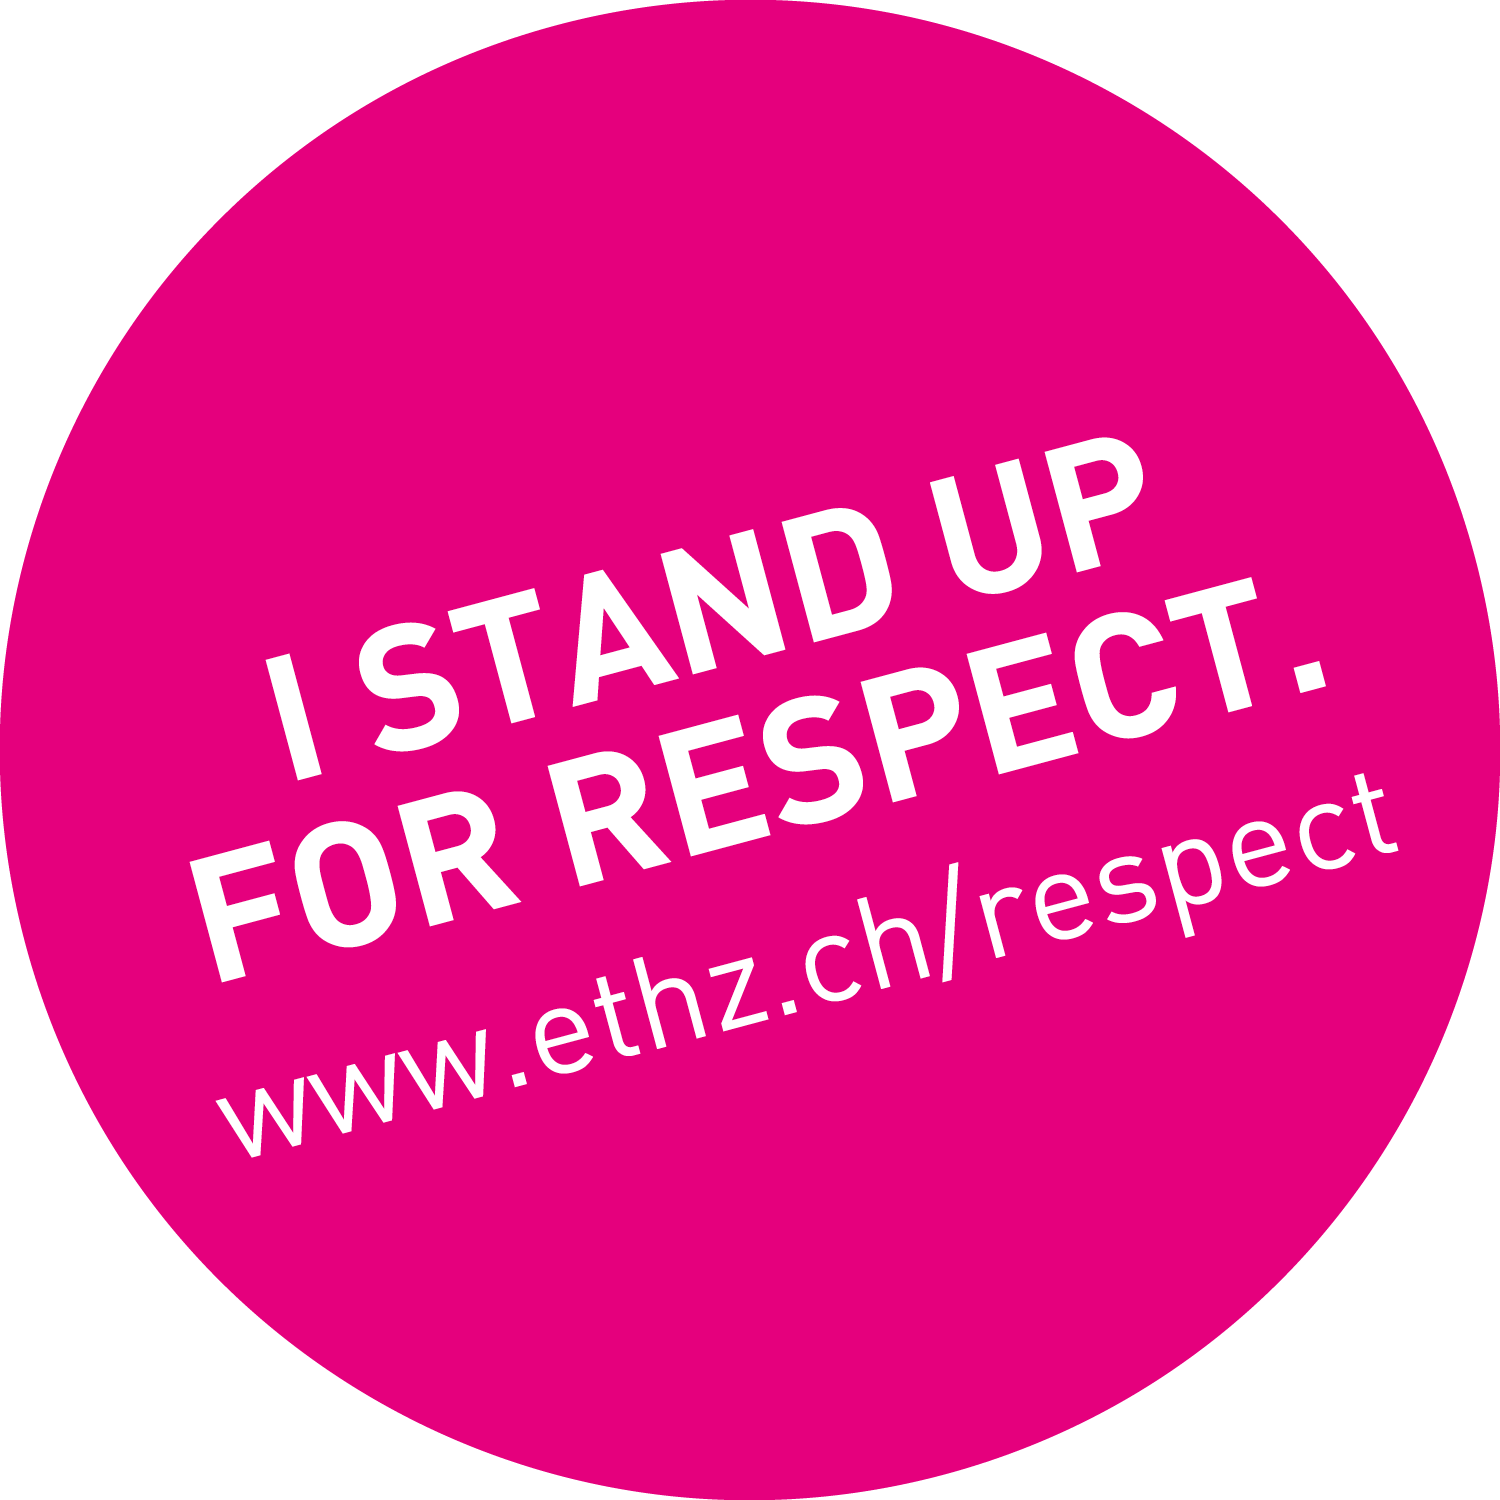 Pink dot with white text "I stand up for respect." www.ethz.ch/respect